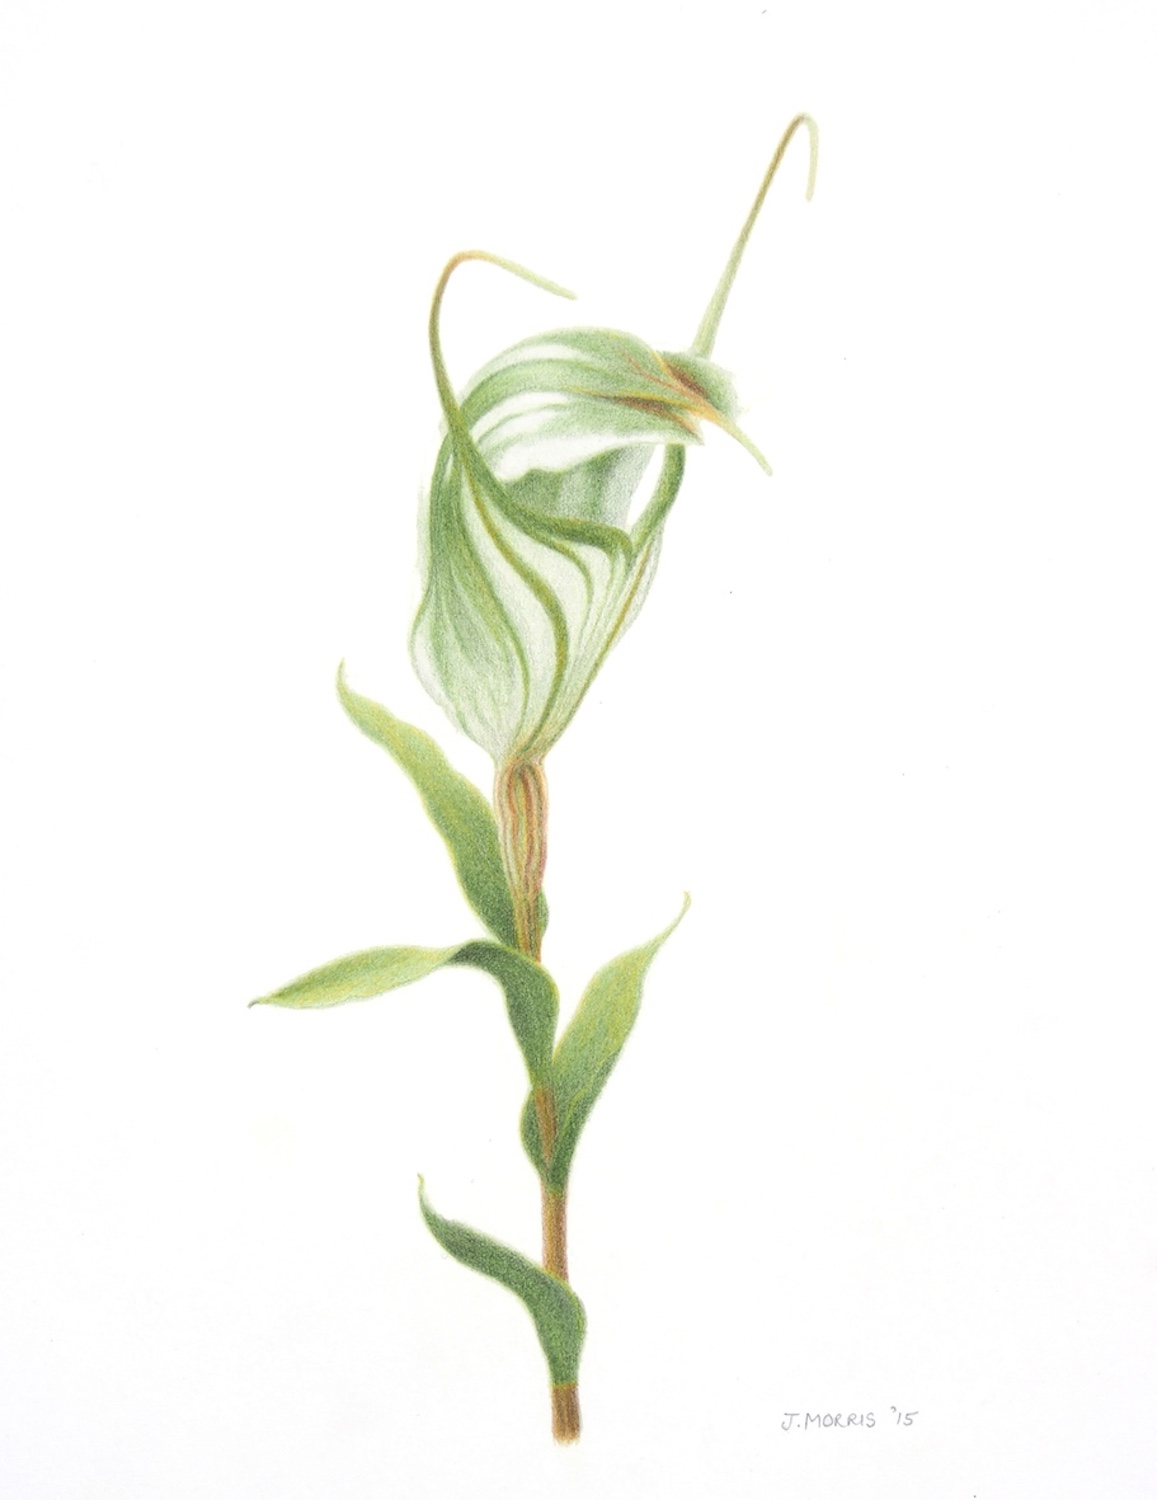 Common Green Shell Orchid, Diplodium robustum (2015).